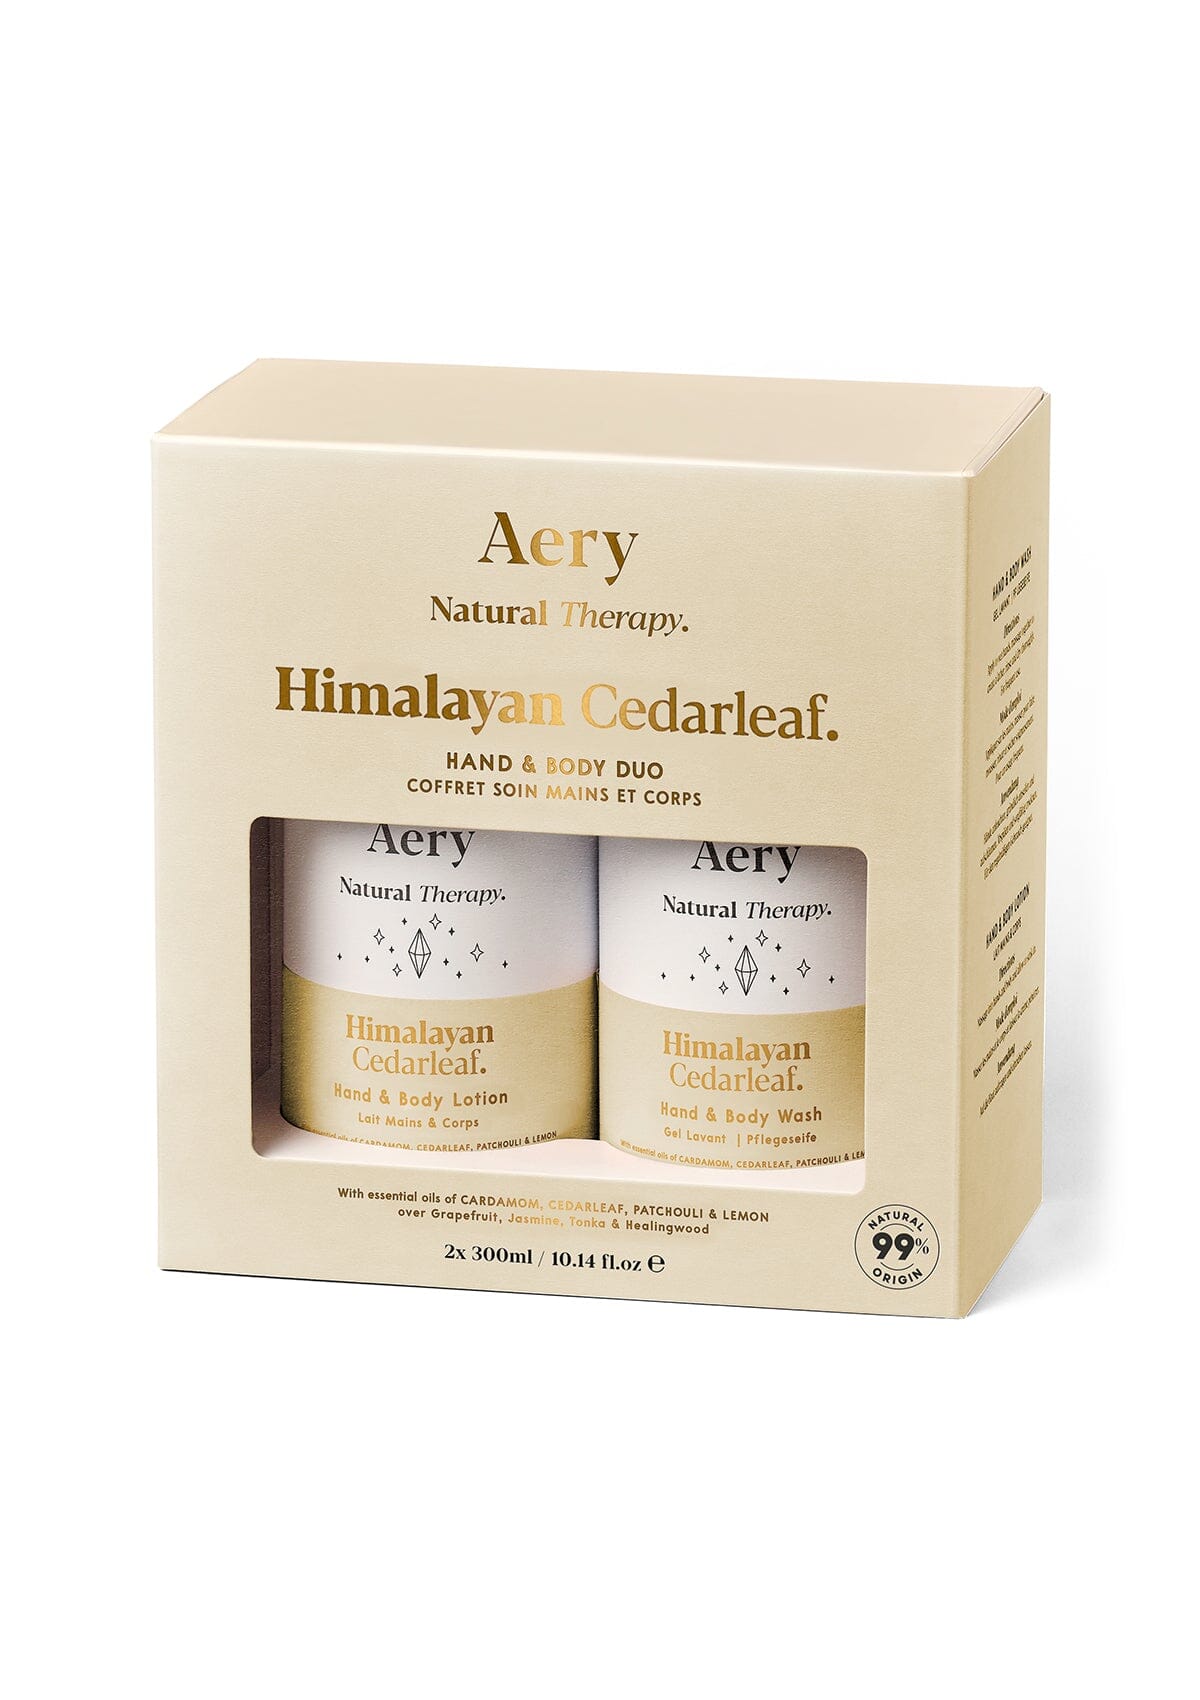 Cream Himalayan Cedarleaf  hand and body duo displayed in product packaging by Aery on white background